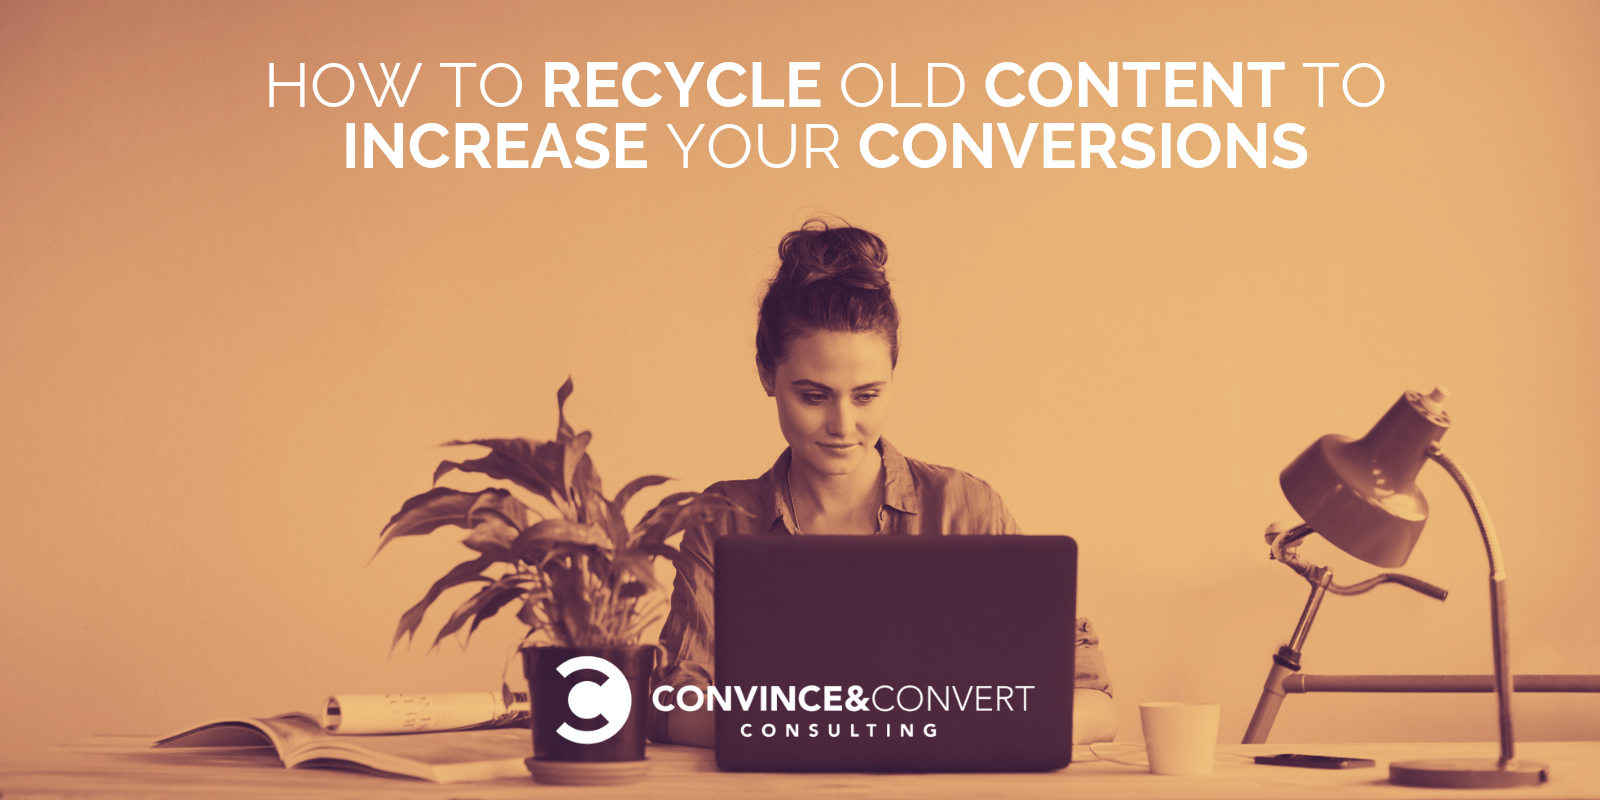 how to recycle old content to increase conversions